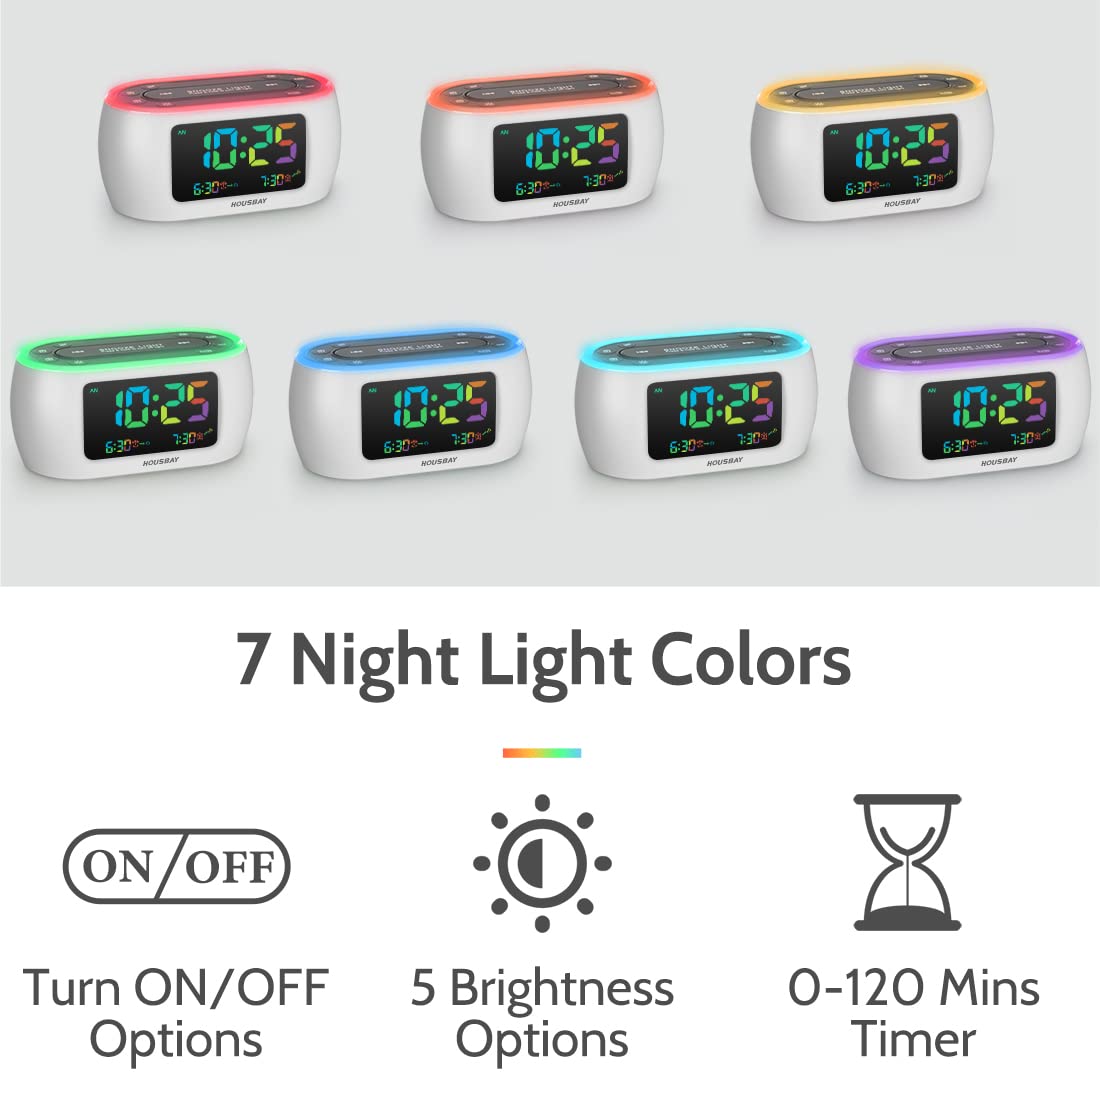 HOUSBAY Glow Small Colorful Alarm Clock Radio with Rainbow Digit, 7 Color Night Light with ON/Off Options, Dual Alarm, Dimmer, FM Radio with SleepTimer for Bedrooms